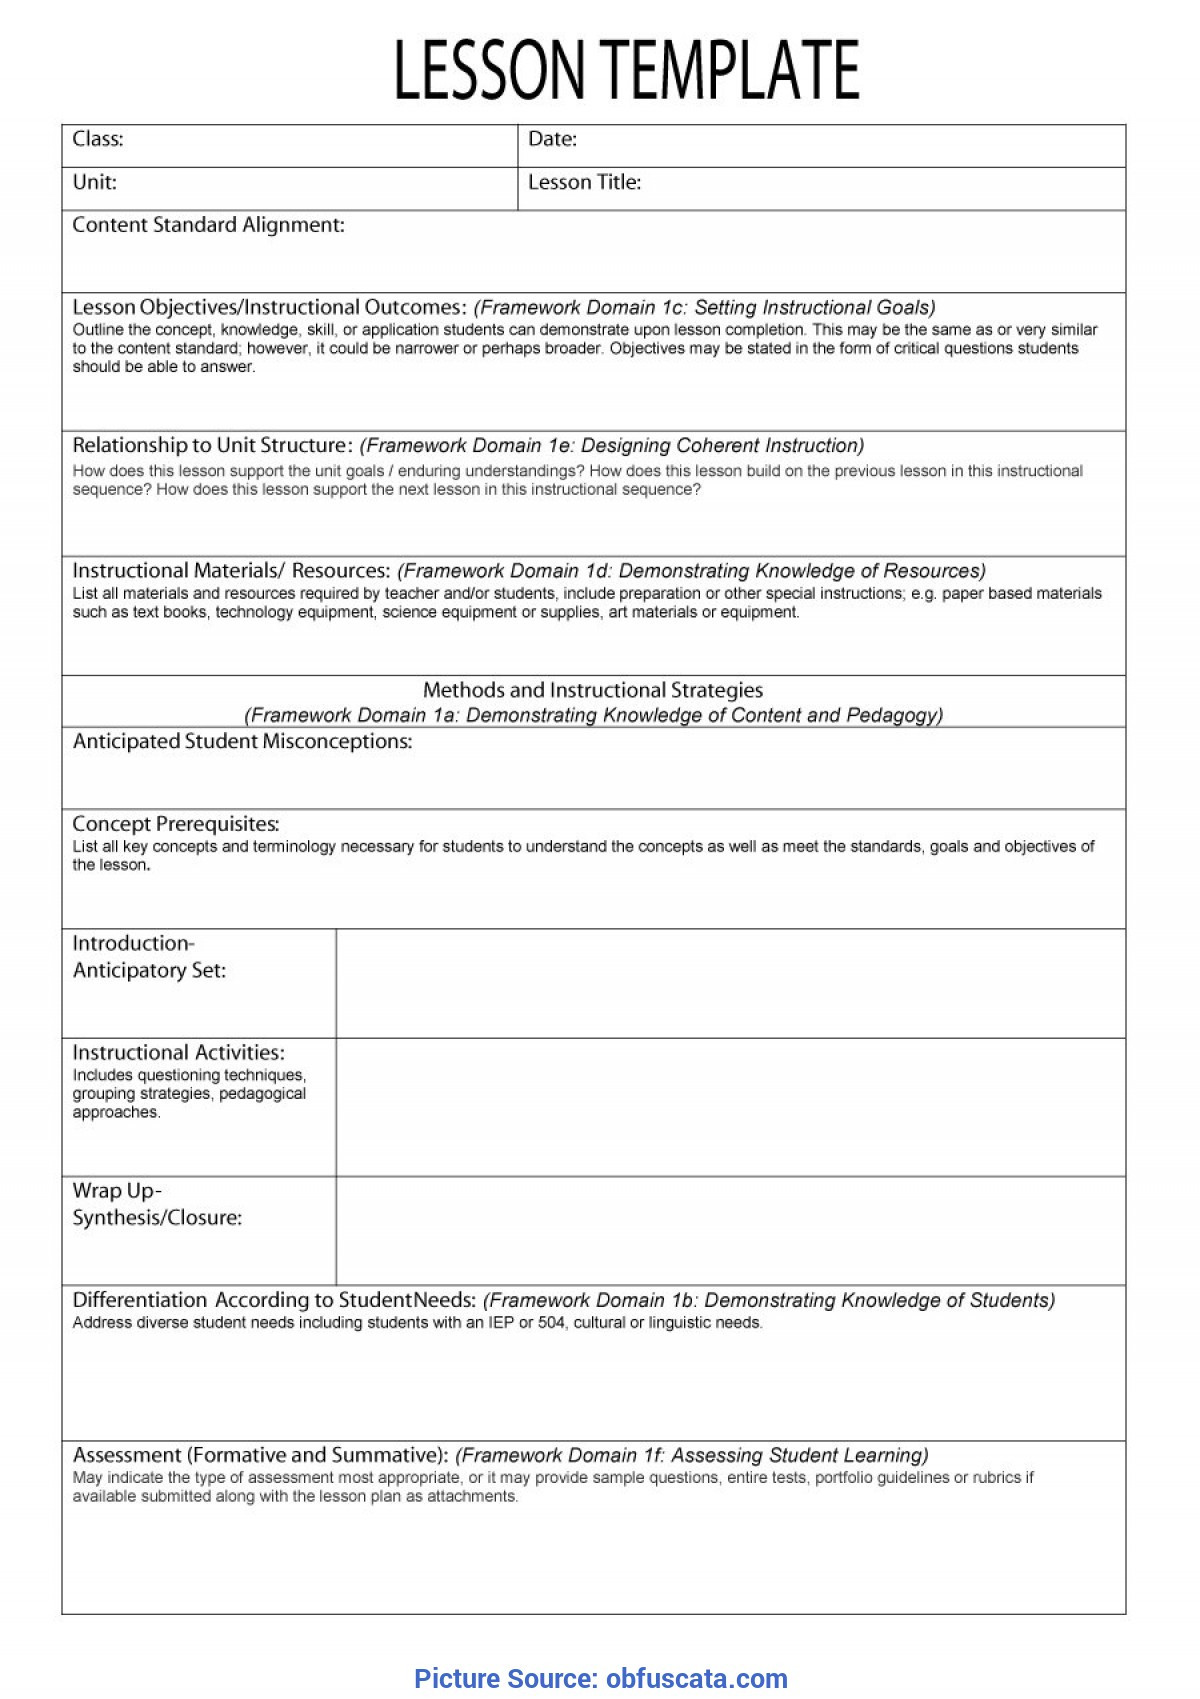 Lesson Plan Websites Typical Simple Blank Lesson Plan Template Basic Lesson